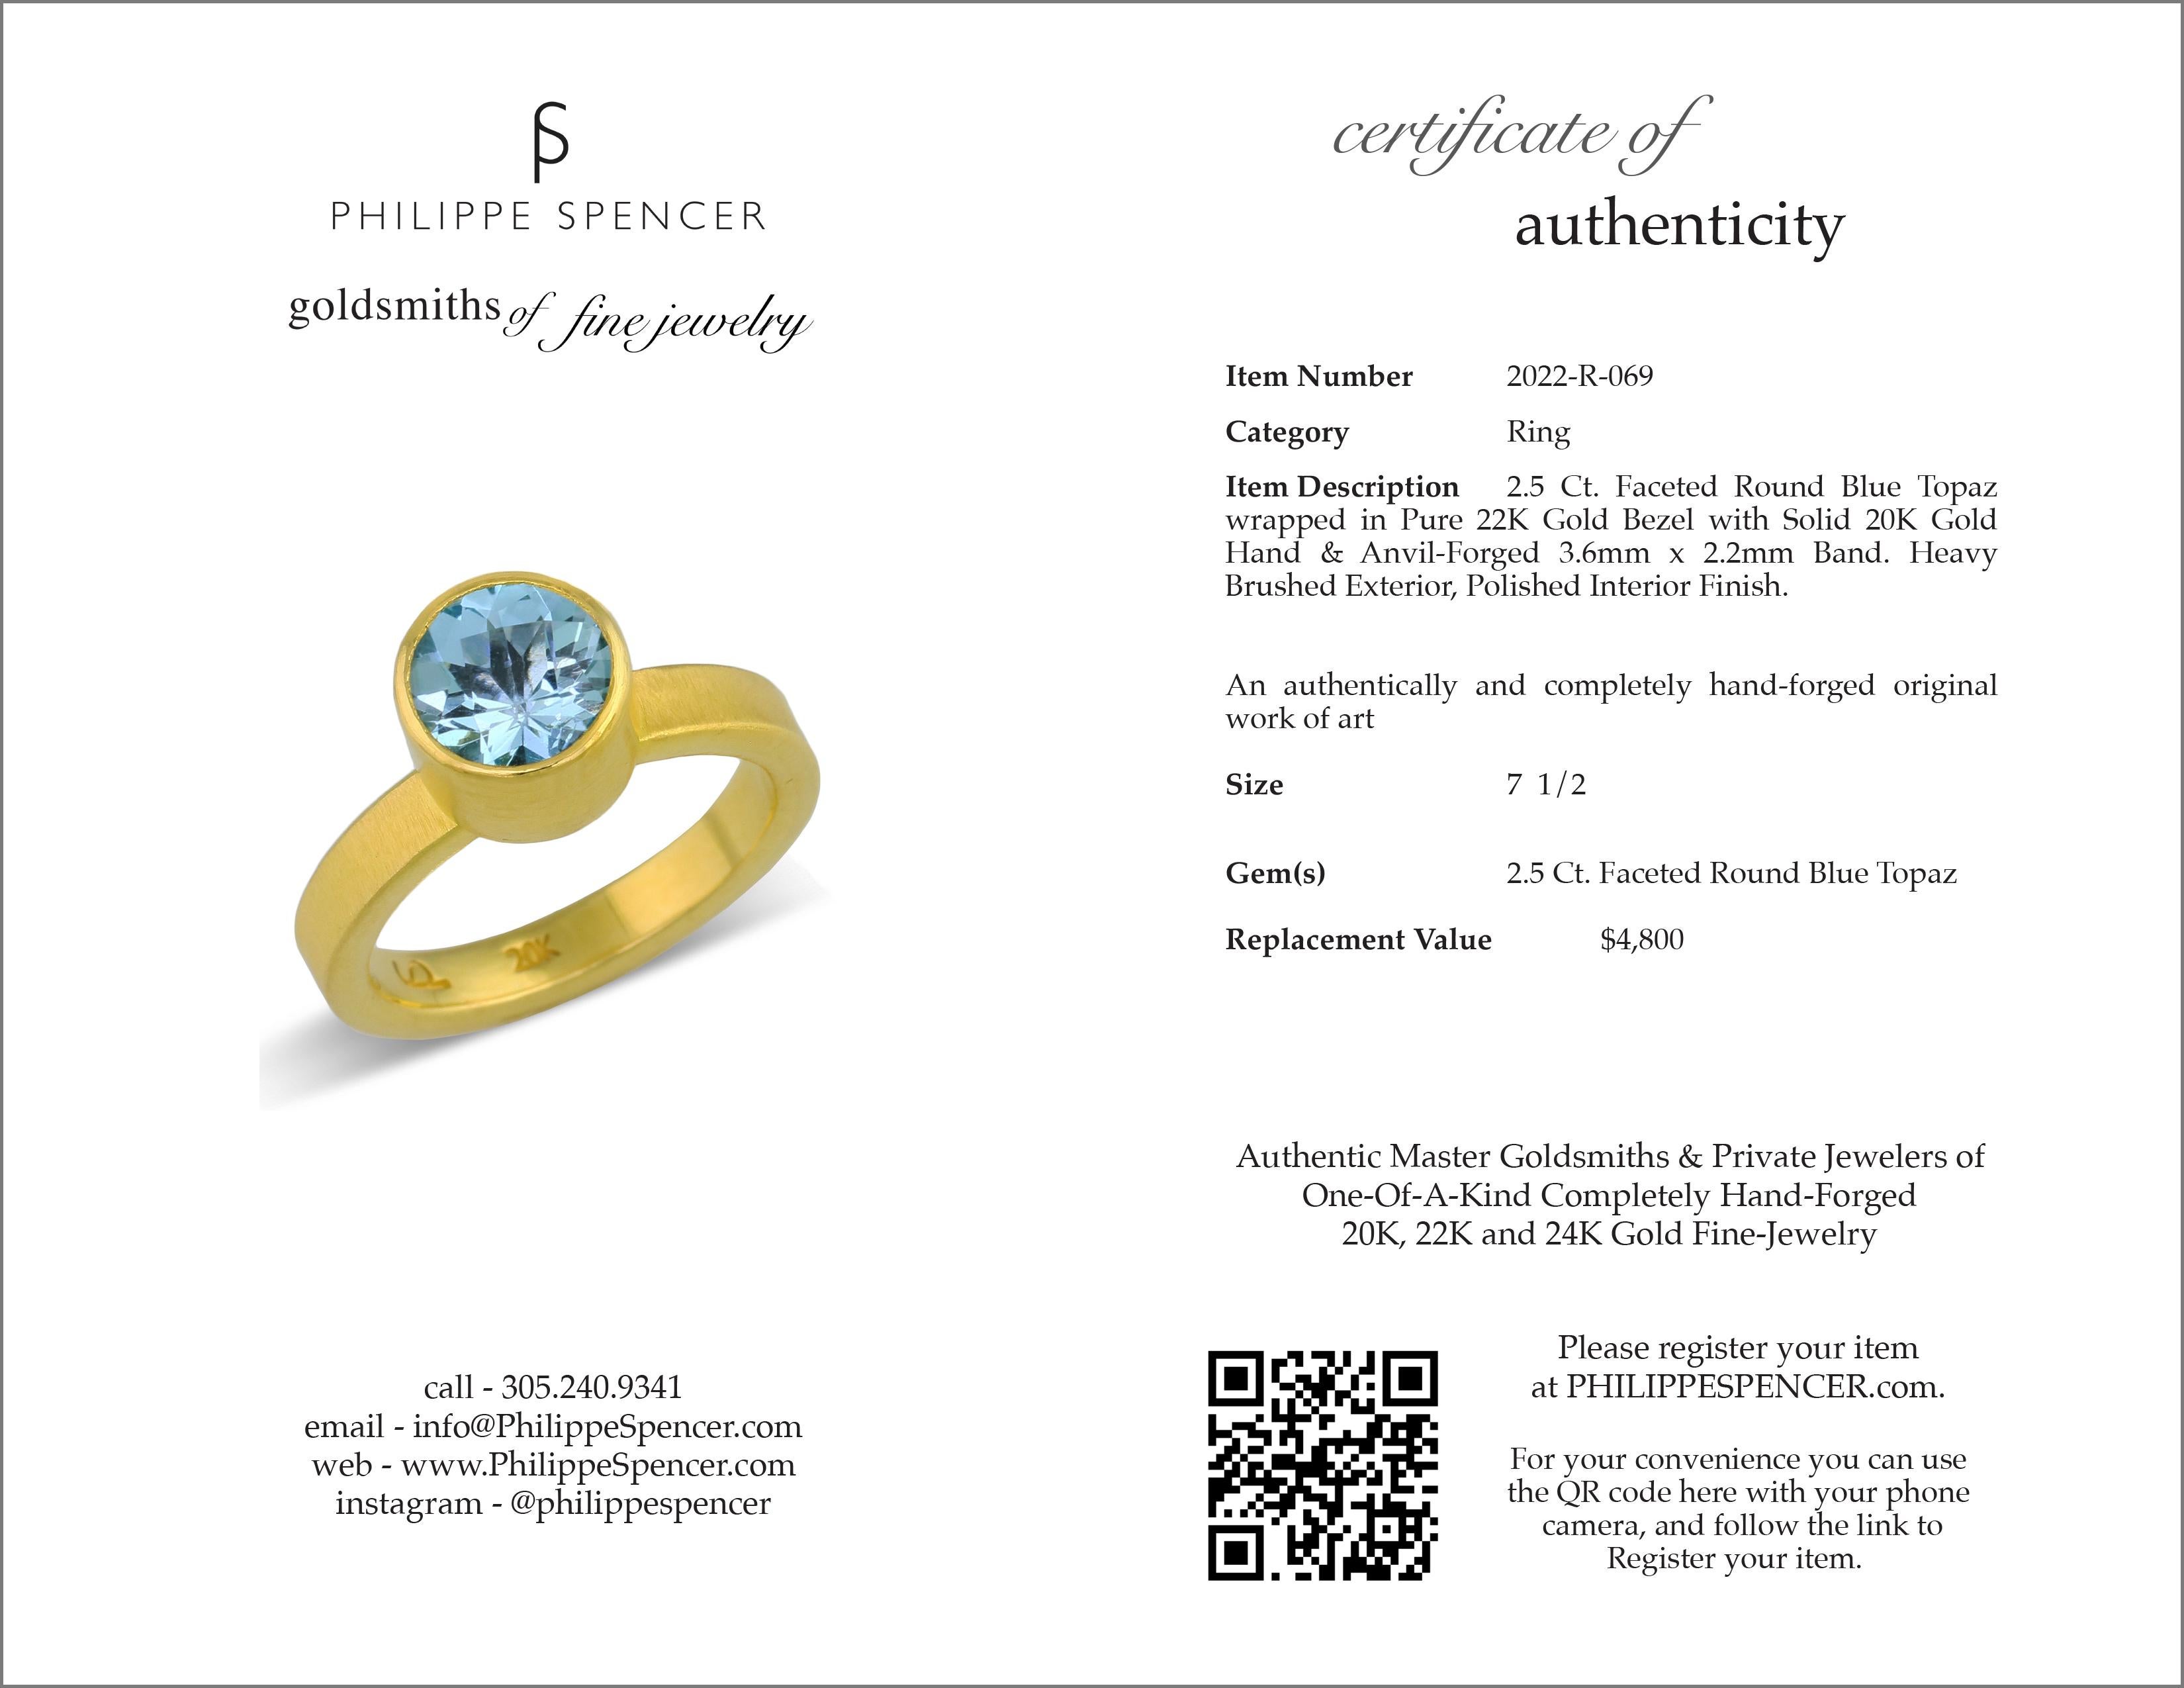 Square Cut PHILIPPE SPENCER 2.5 Ct. Blue Topaz in 22K and 20K Gold Statement Ring For Sale